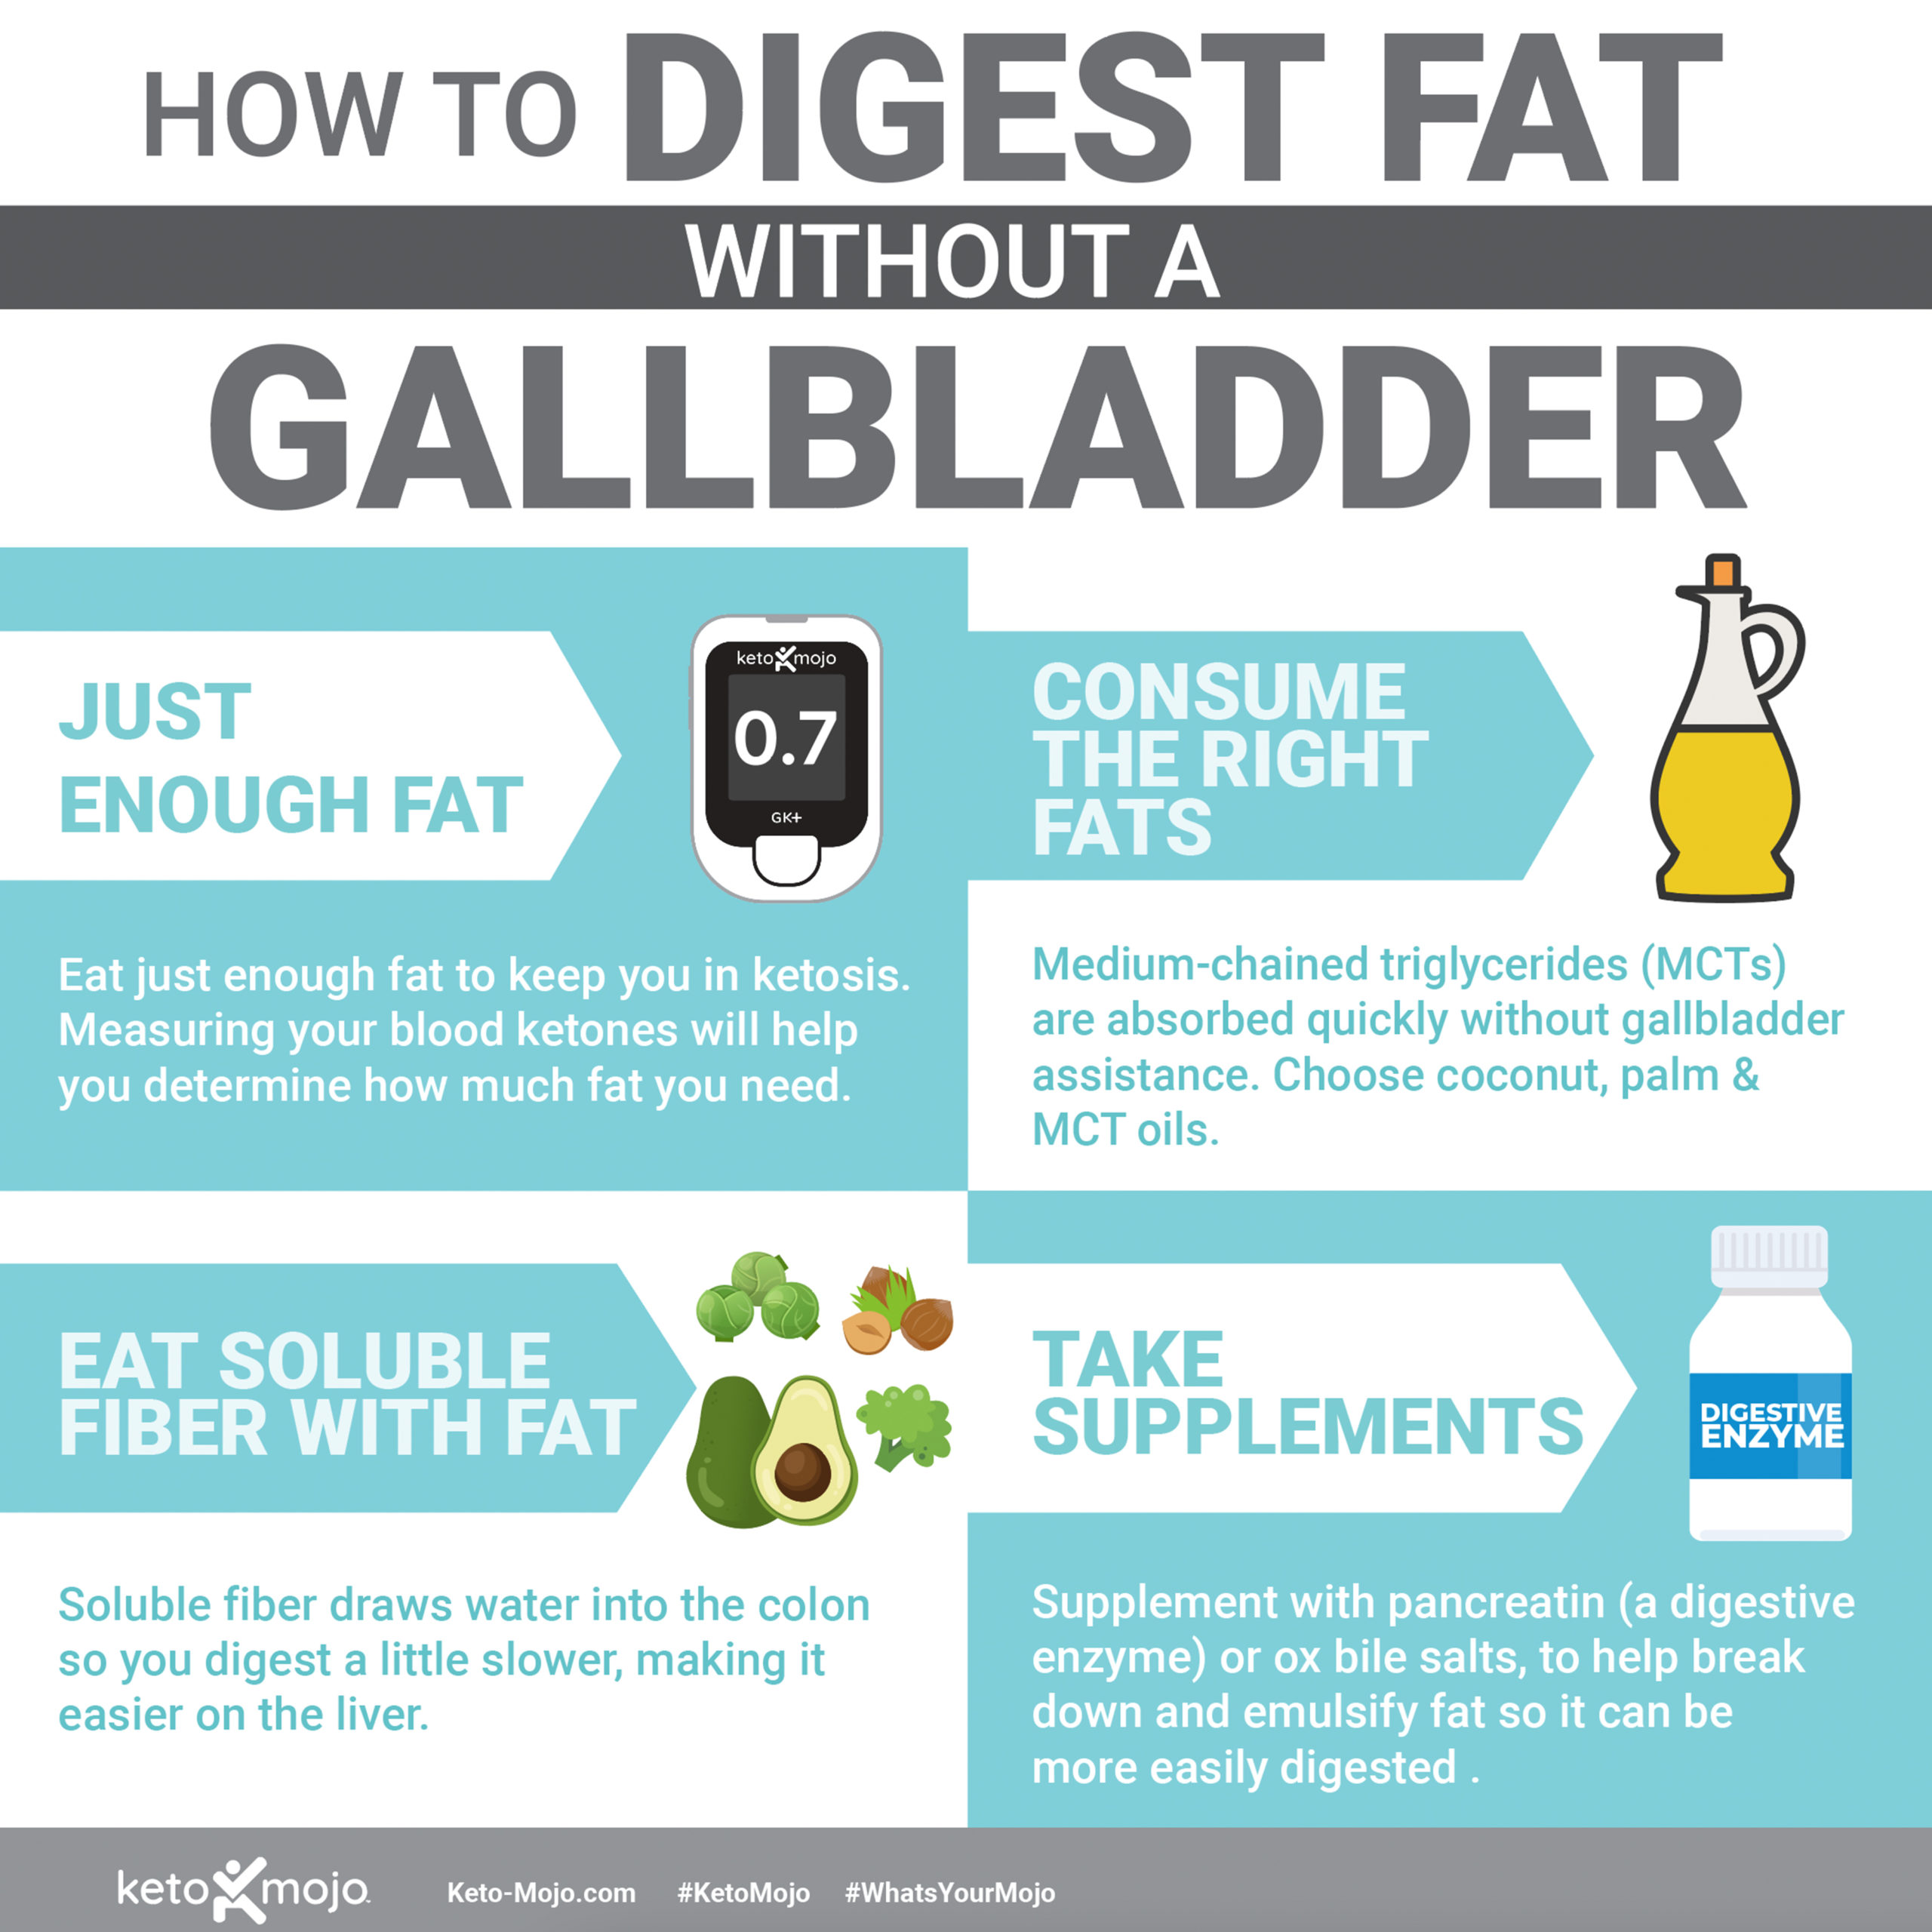 Digest Digesting Fat Without a Gallbladder